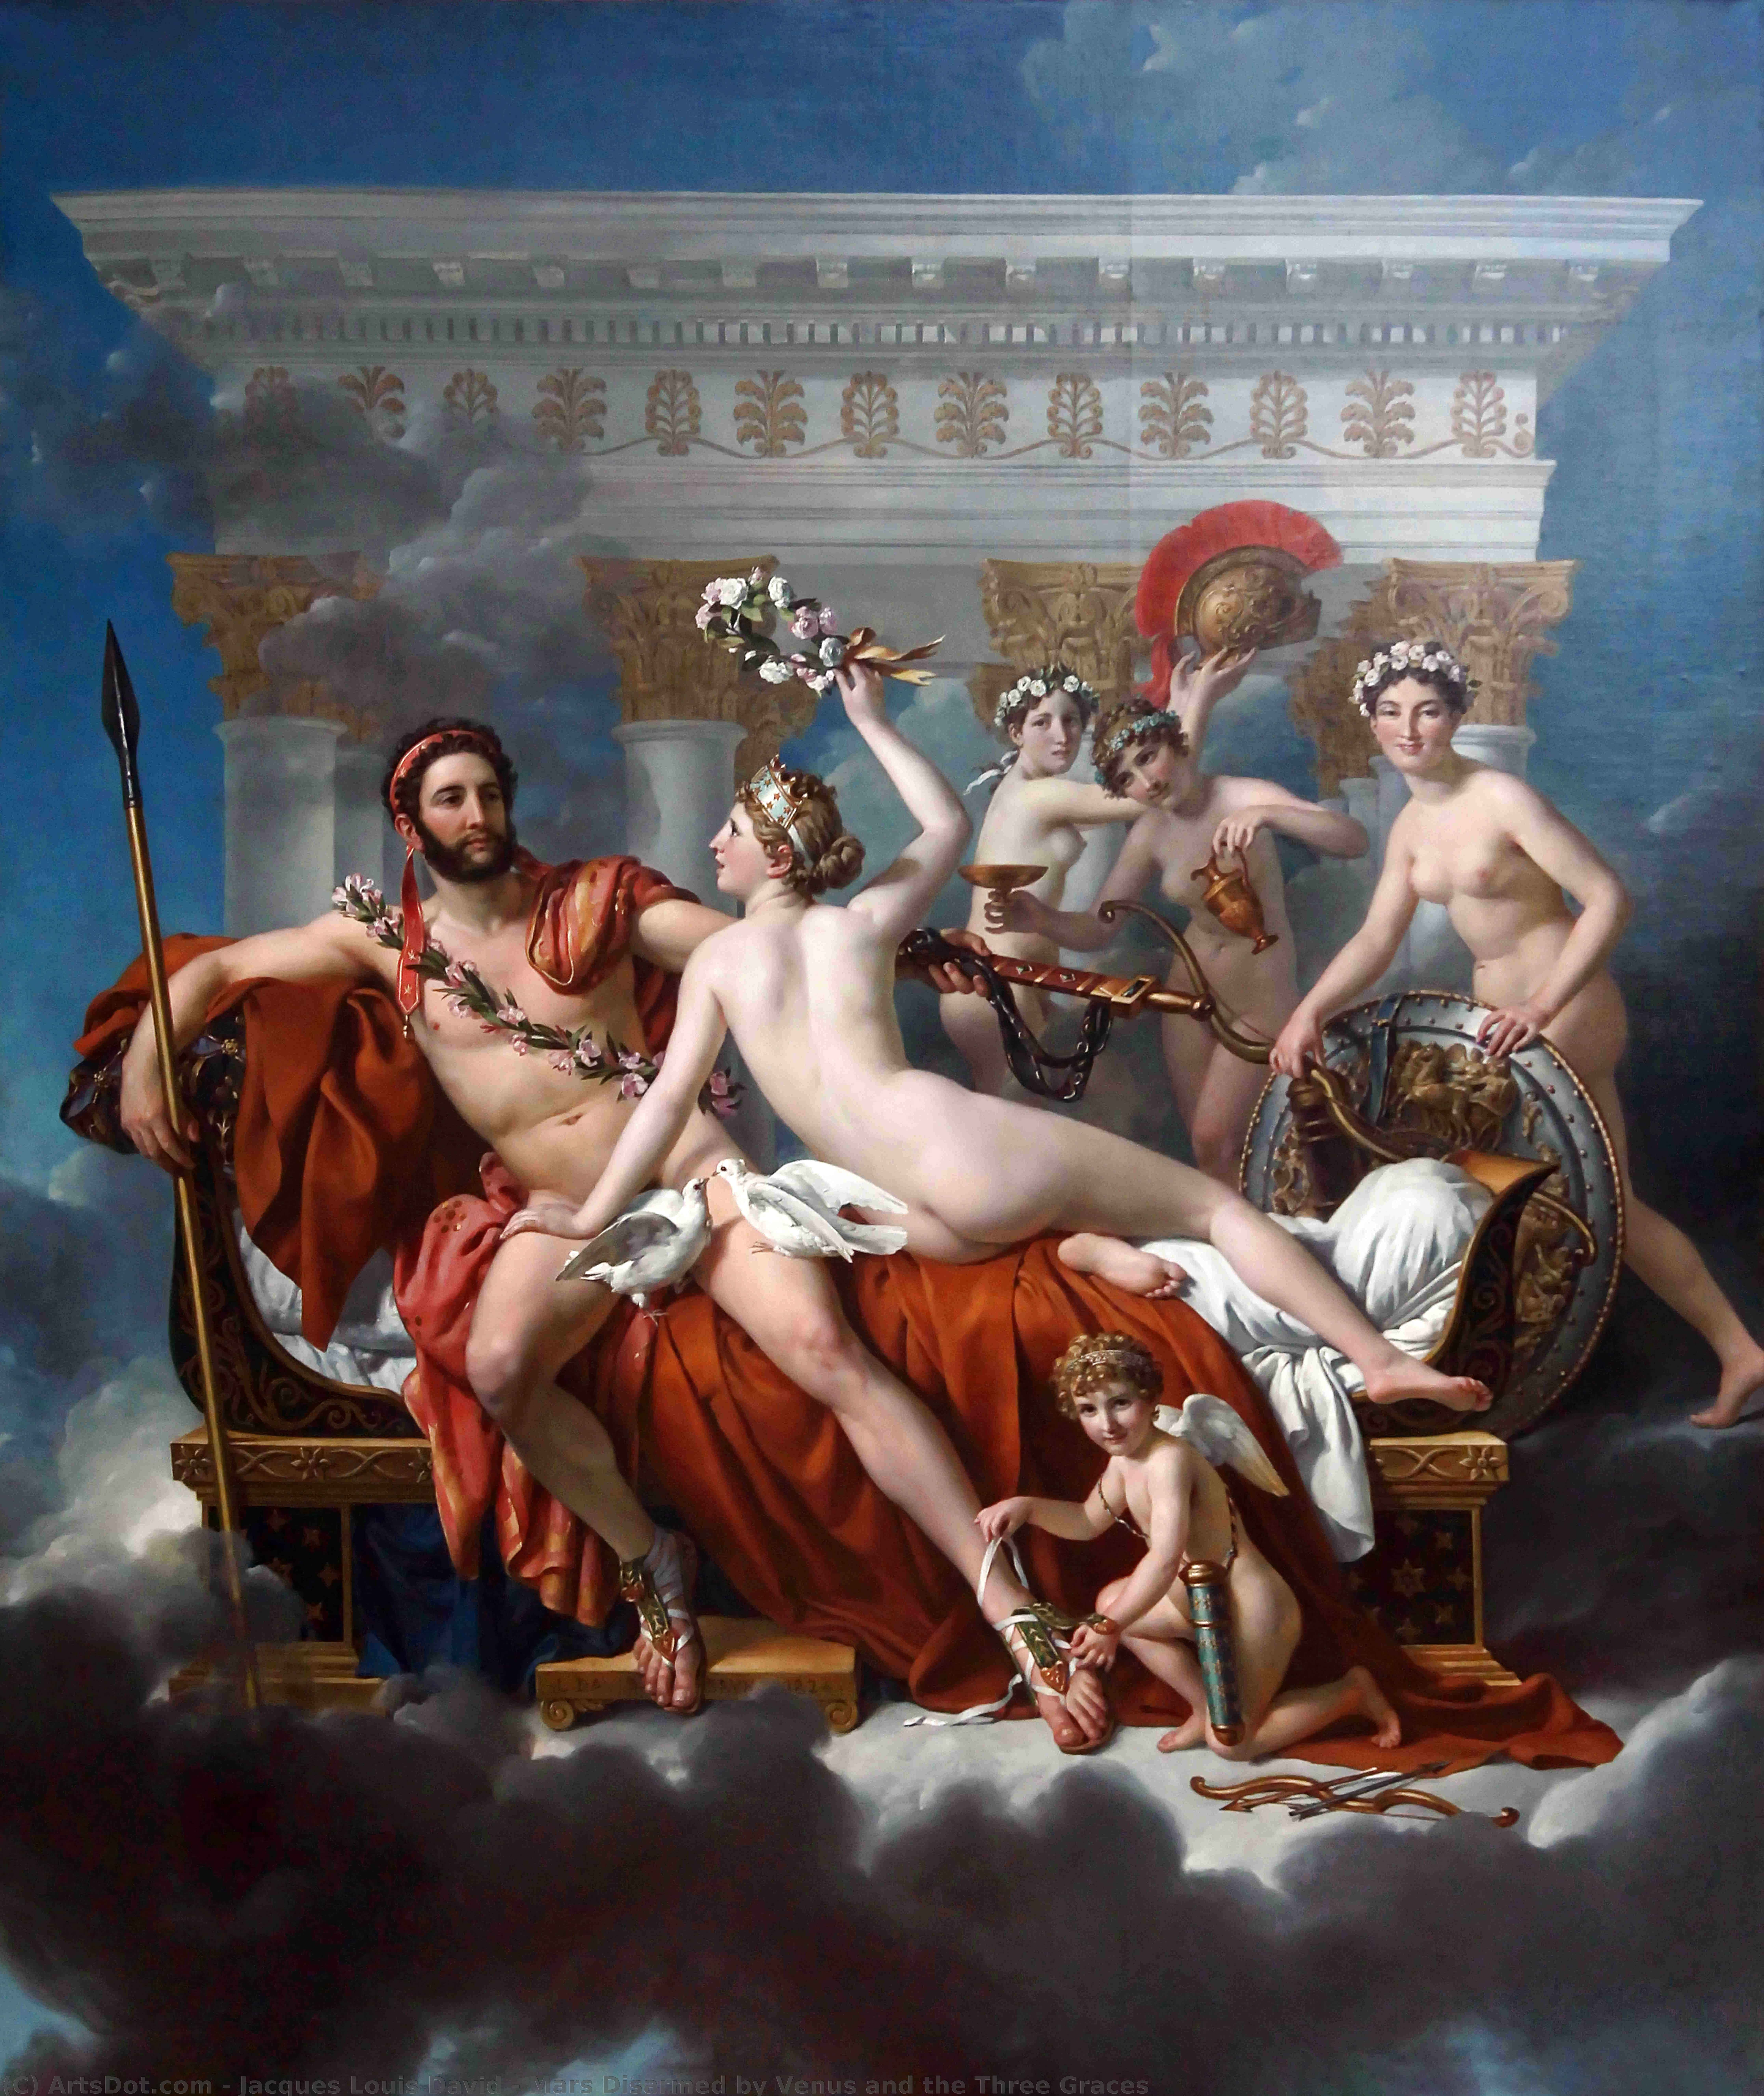 WikiOO.org - 백과 사전 - 회화, 삽화 Jacques Louis David - Mars Disarmed by Venus and the Three Graces